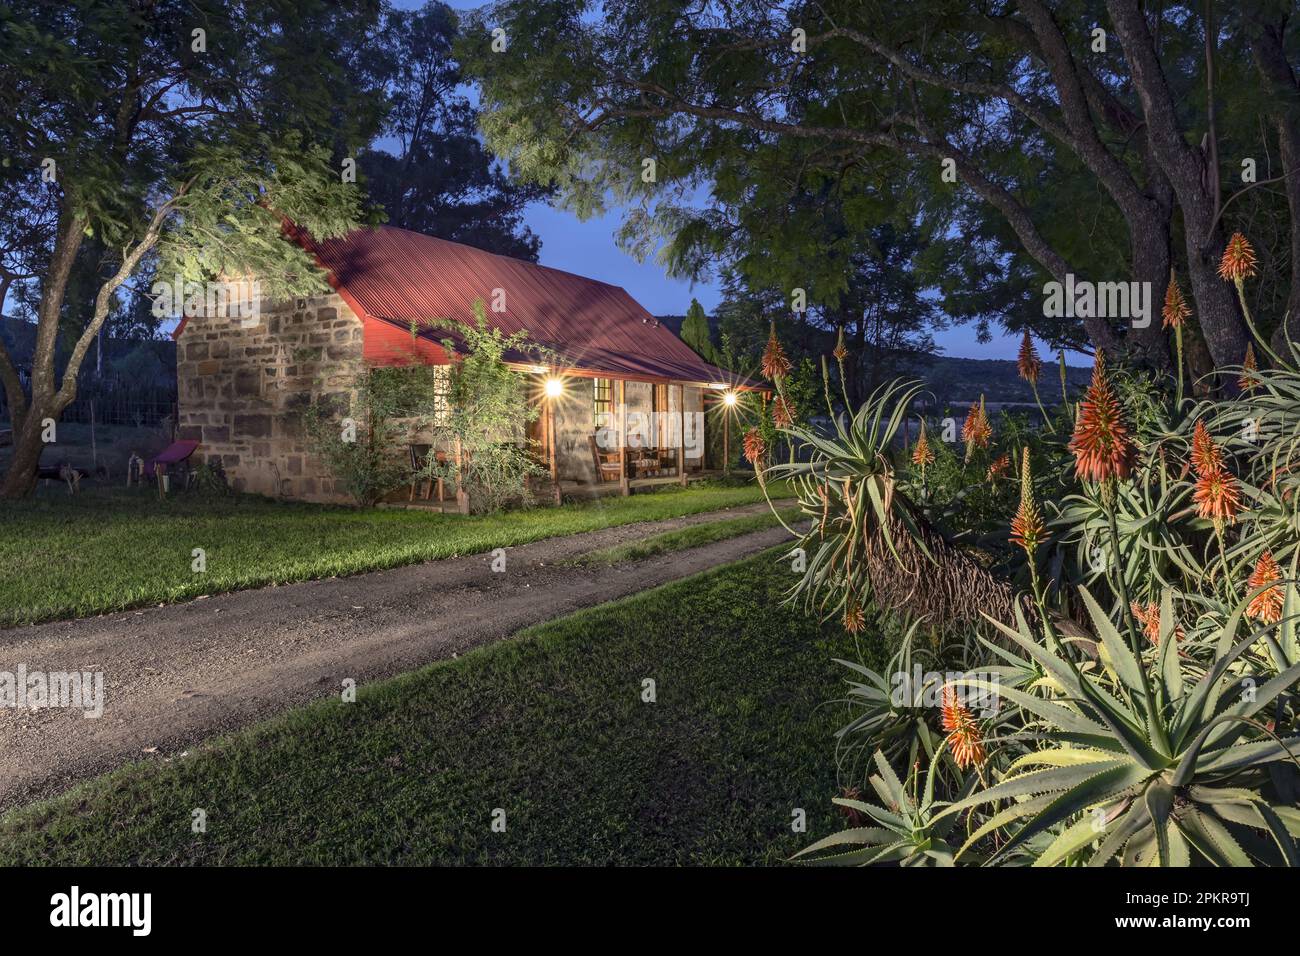 The guest cottage on Norwood farm surrounded by JacarandaTrees, shrubs and Aloes. Stock Photo